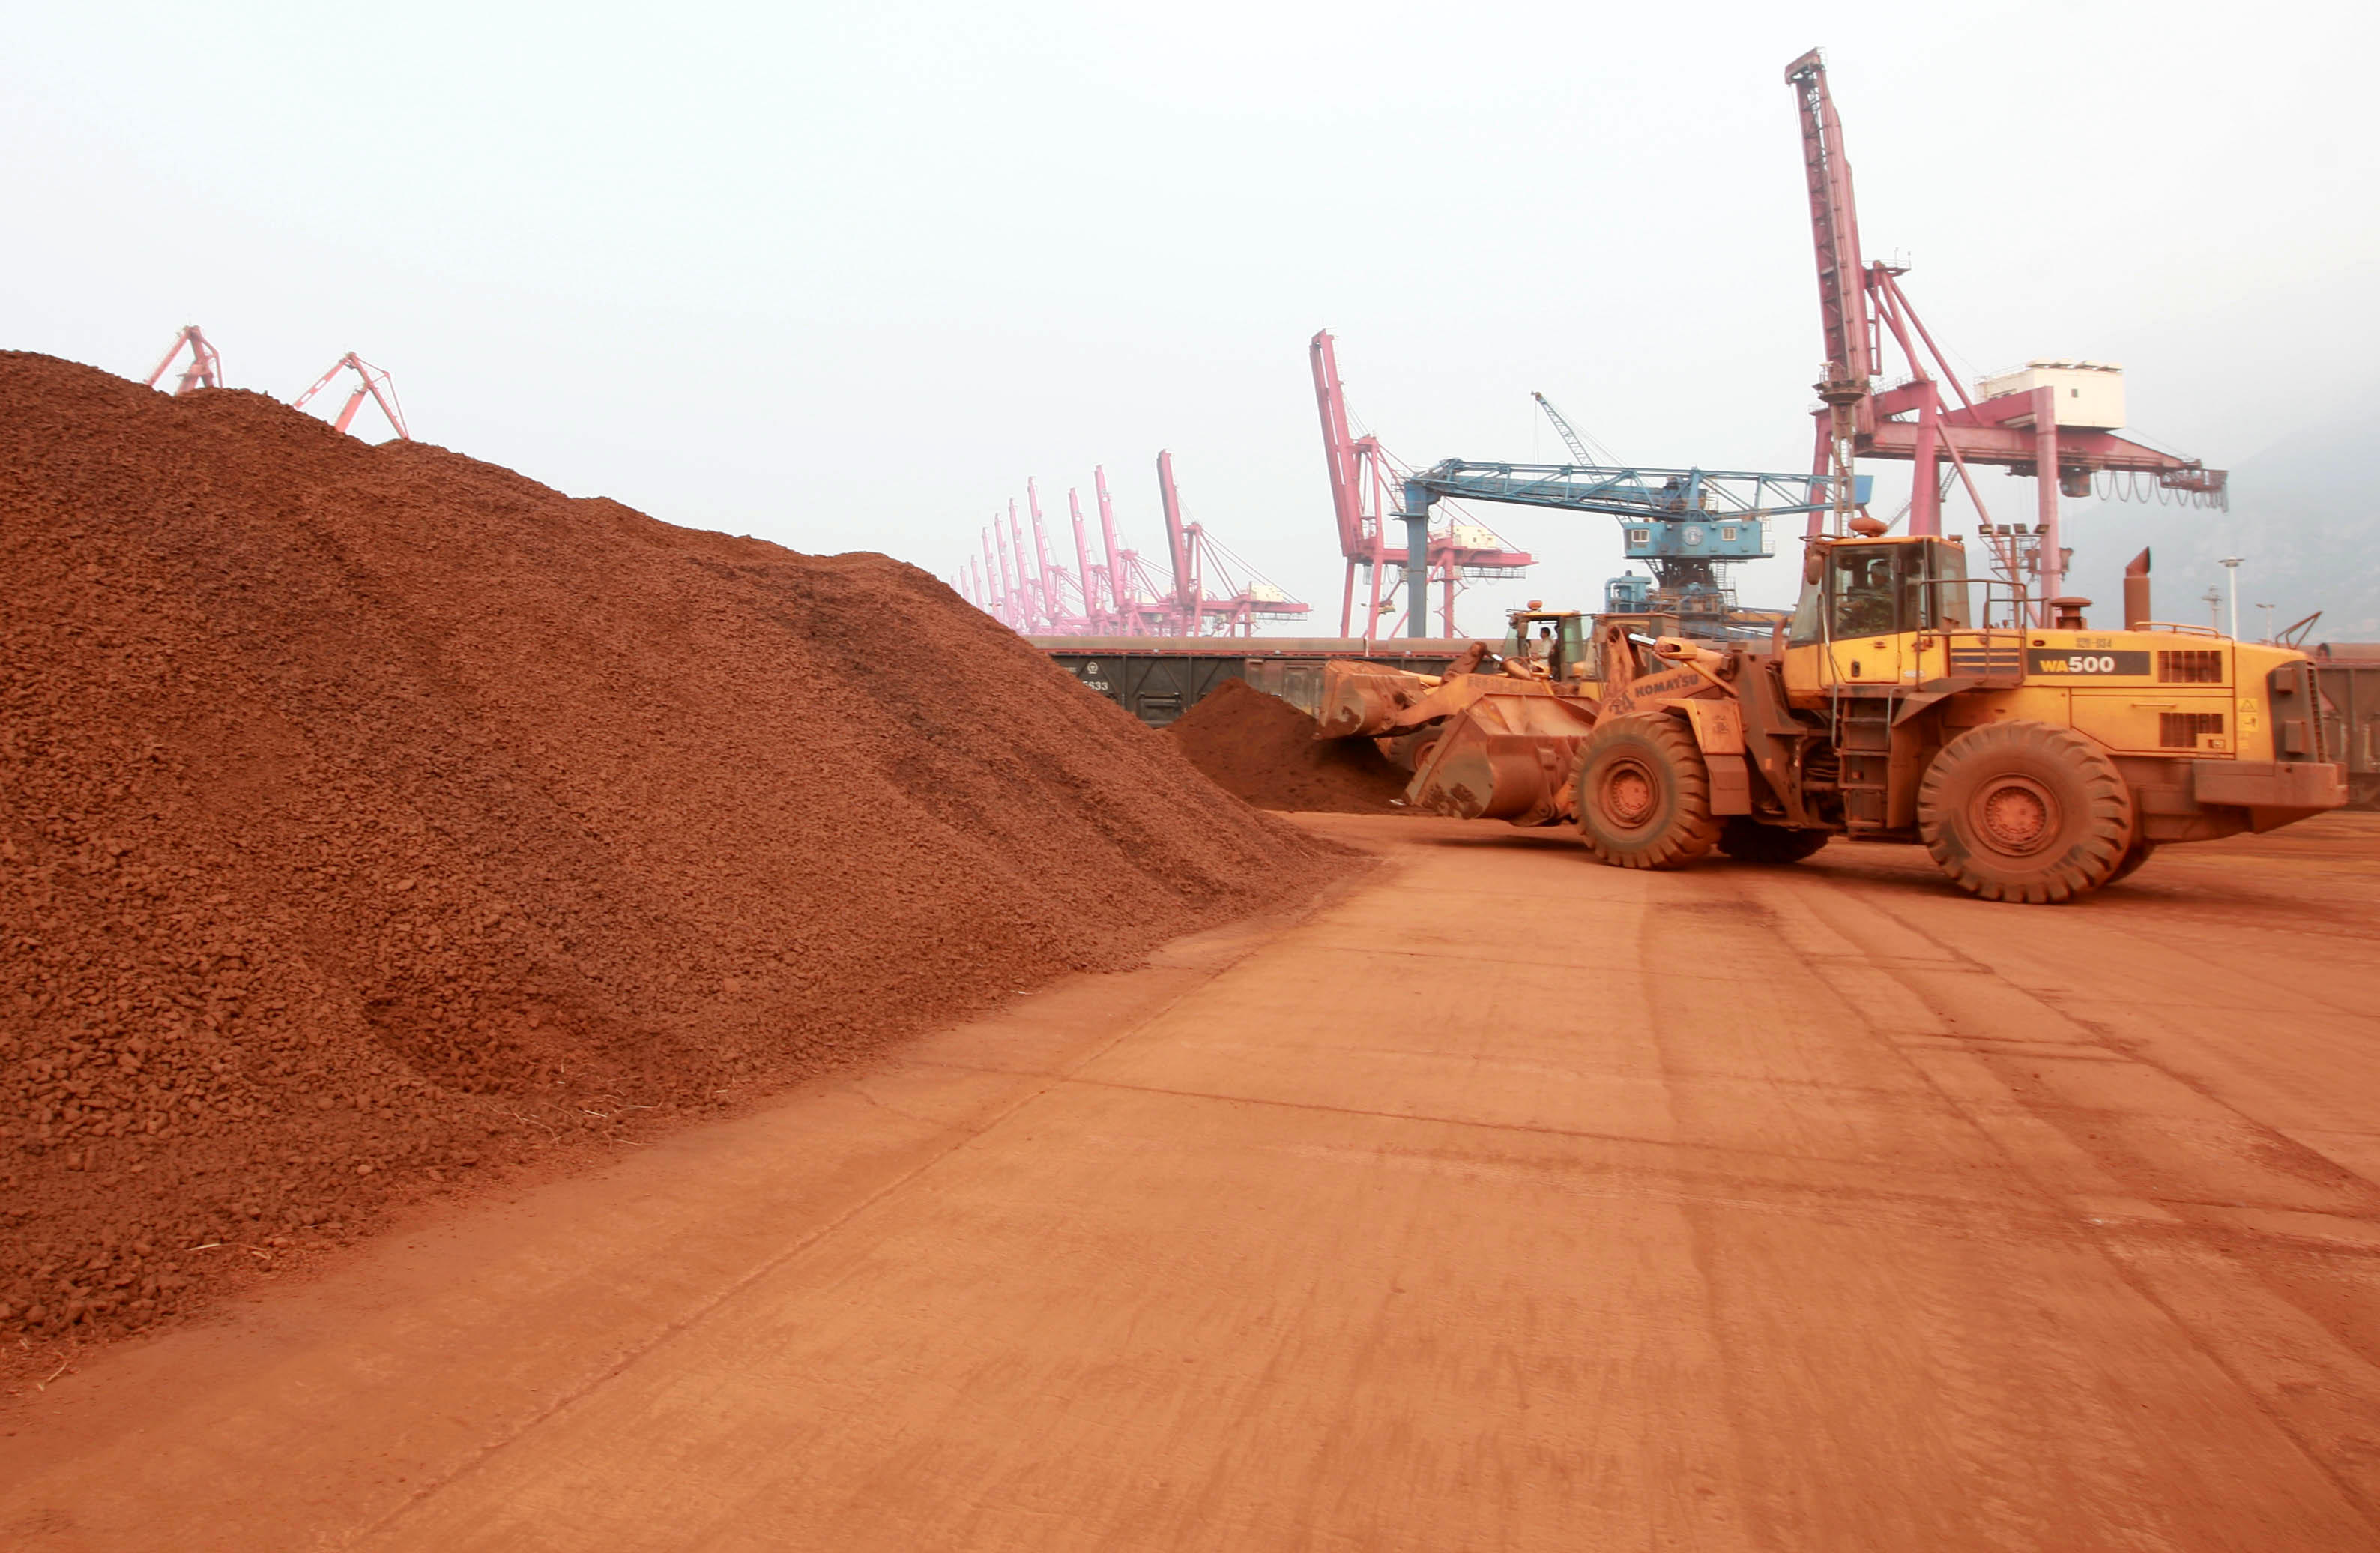 A truck transports rare earth to be exported at the Port of Lianyungang in Jiangsu Province, China